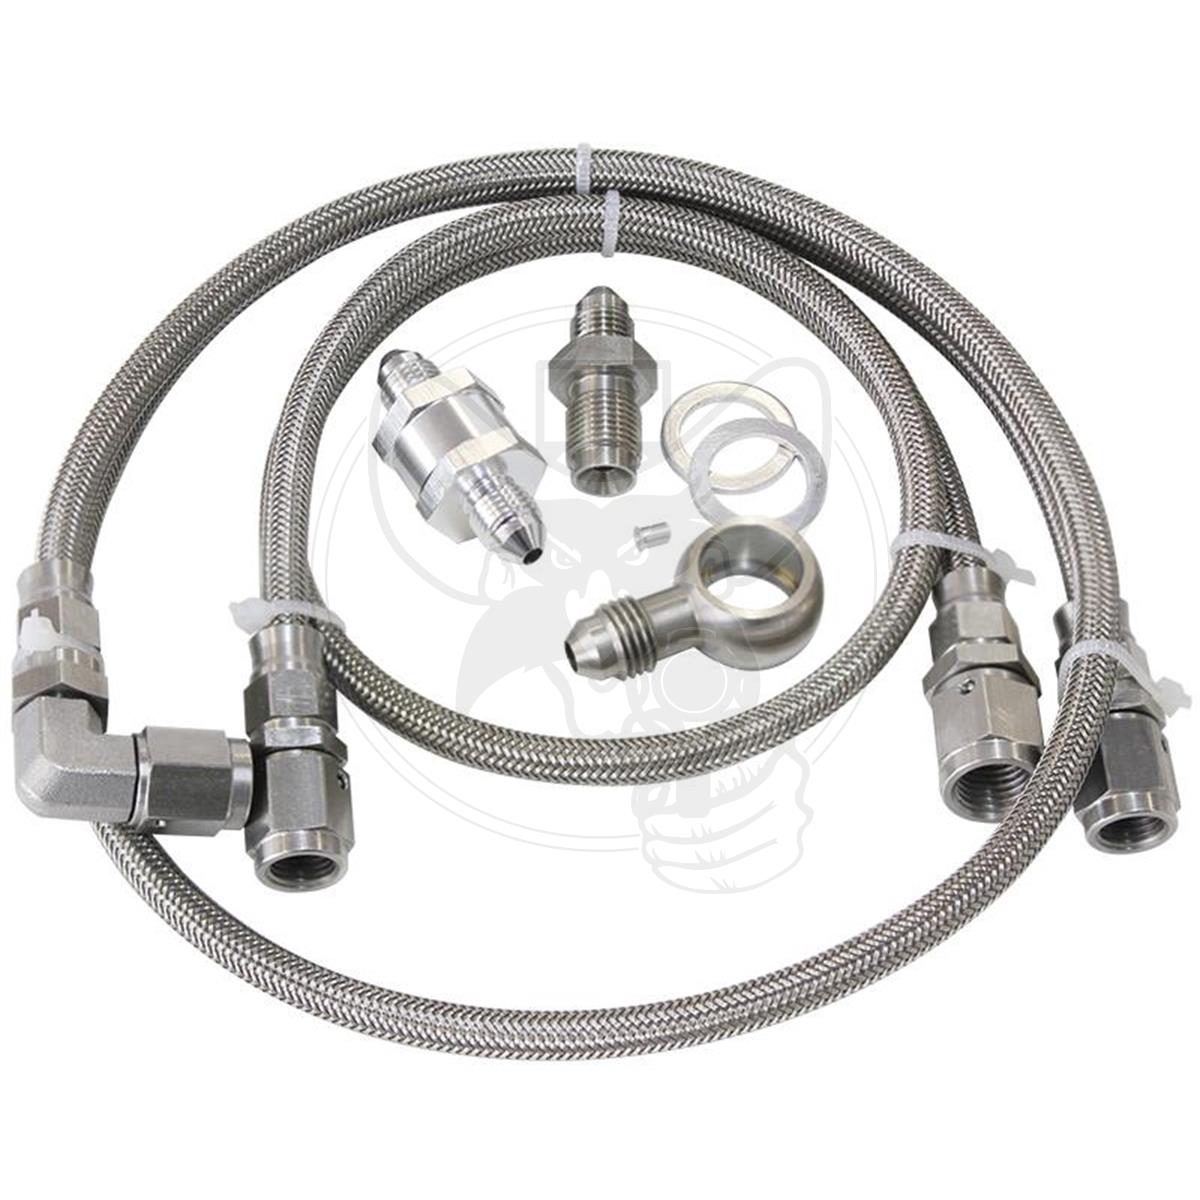 AEROFLOW TURBOCHARGER OIL FEED LINE WITH FILTER FITS FORD XR6 BA/FG